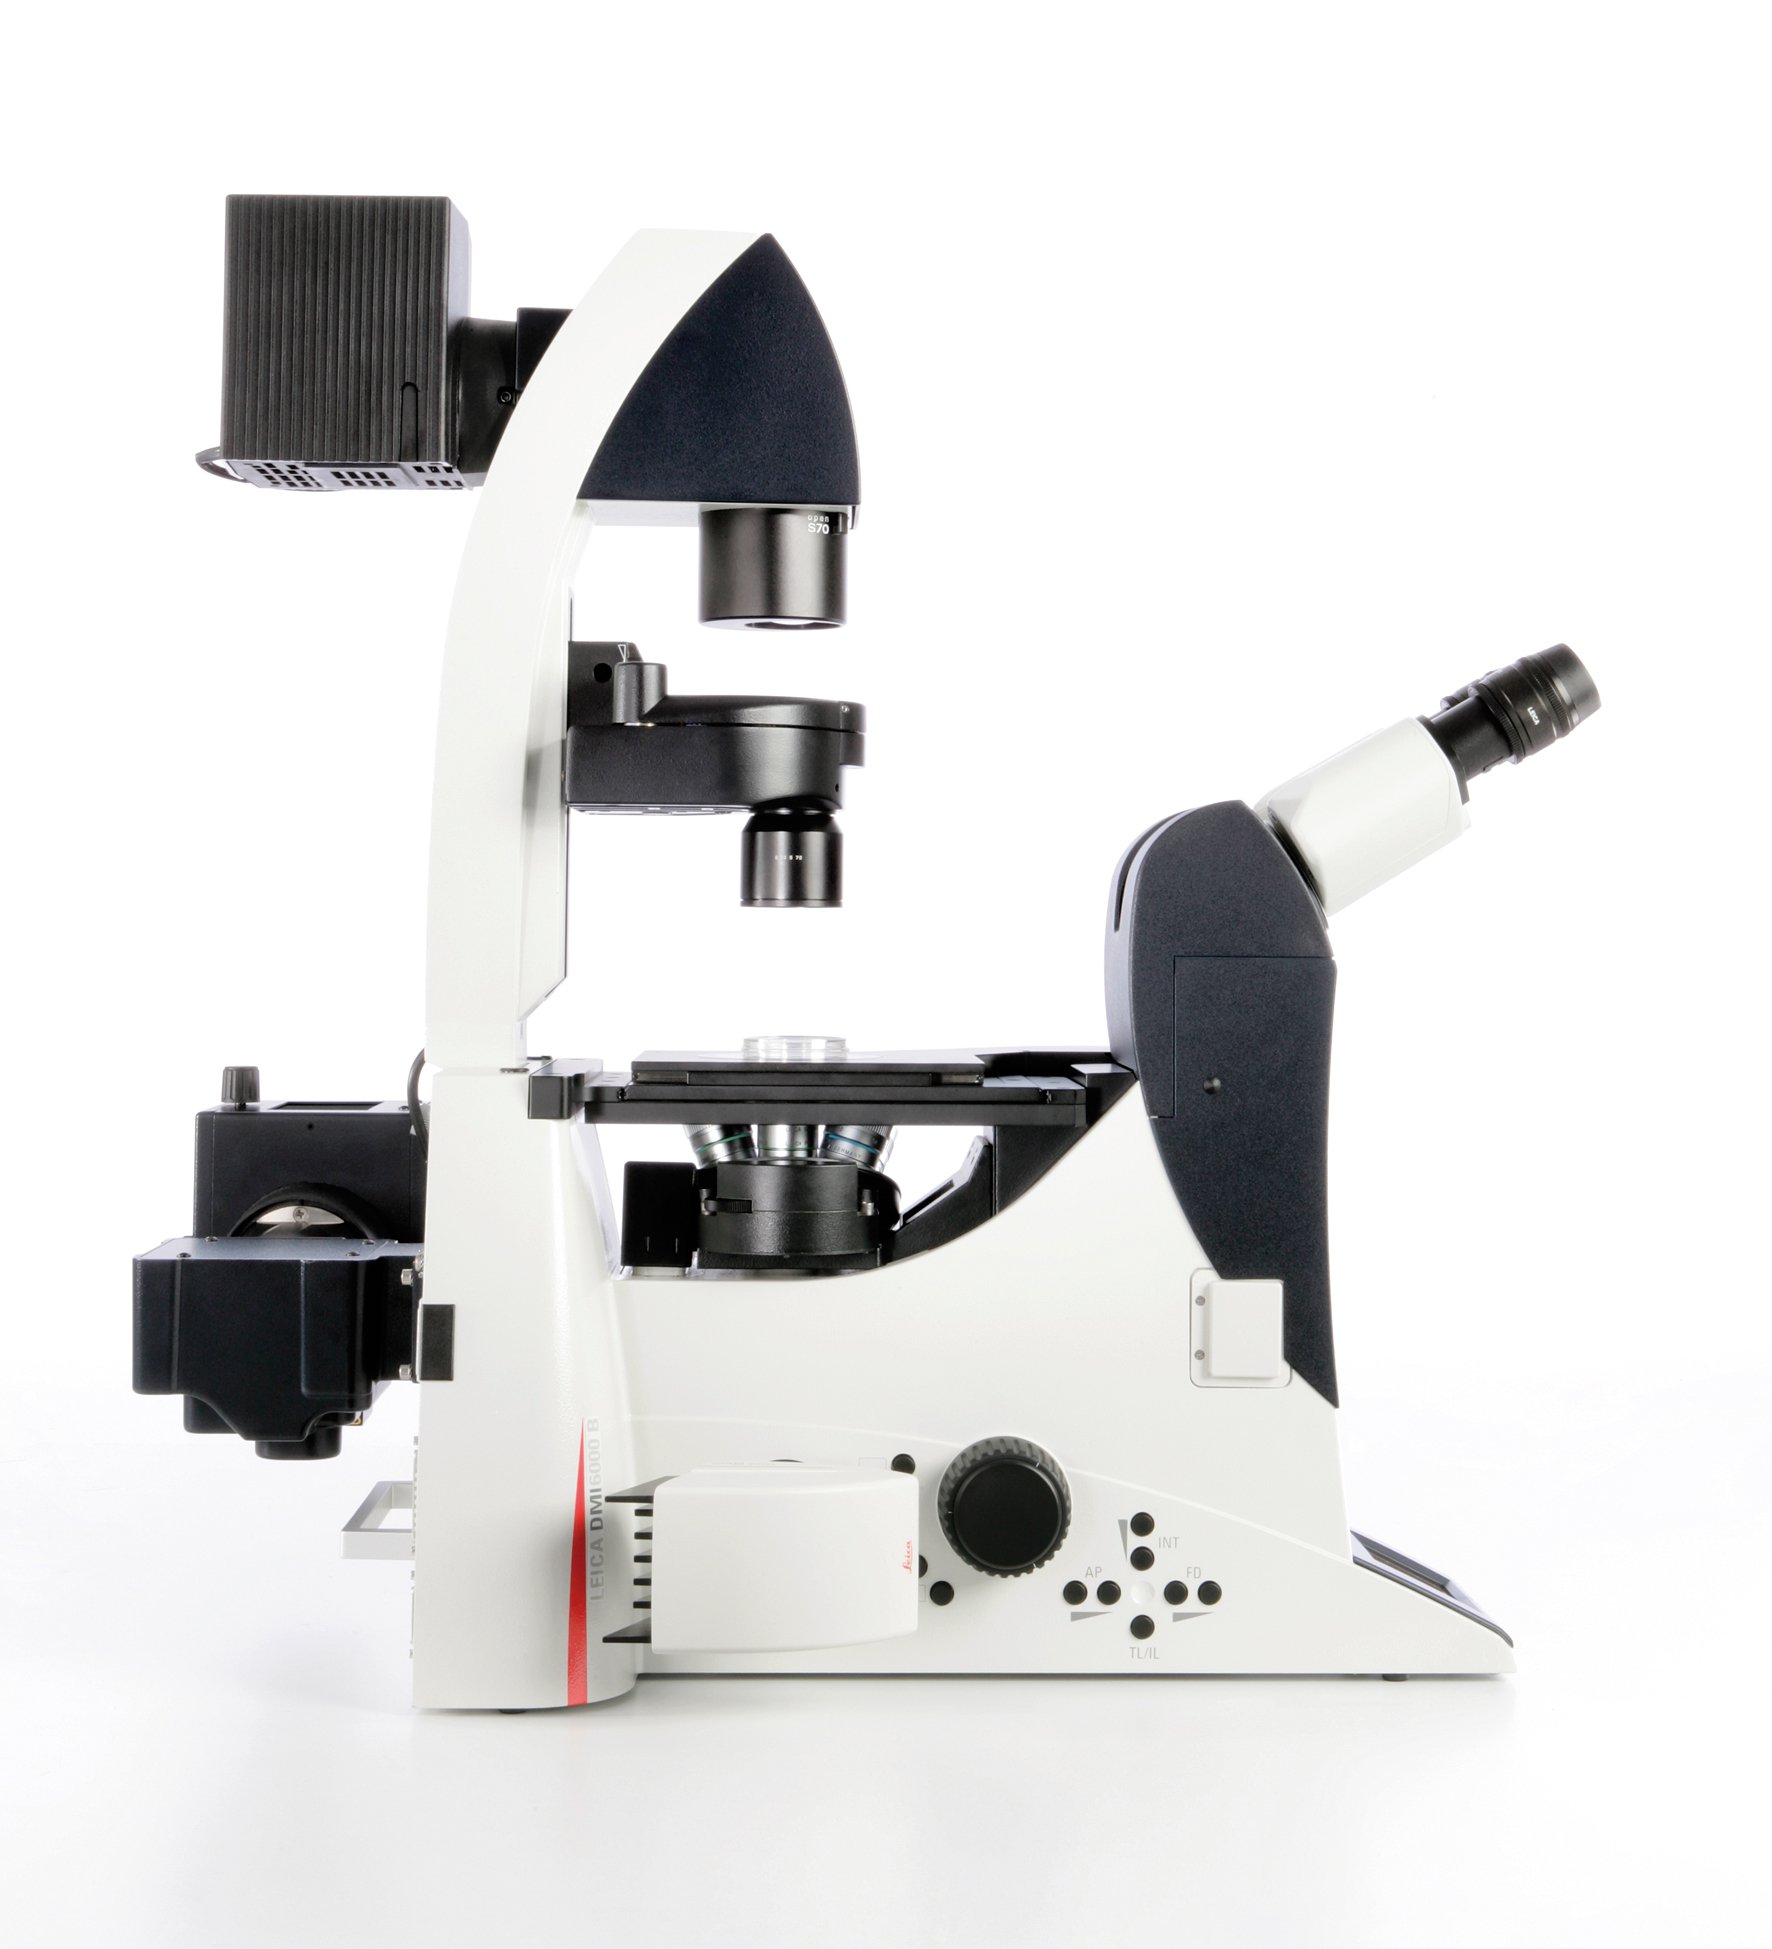 The Leica DMI6000 B provides high-level automation for advanced research applications.